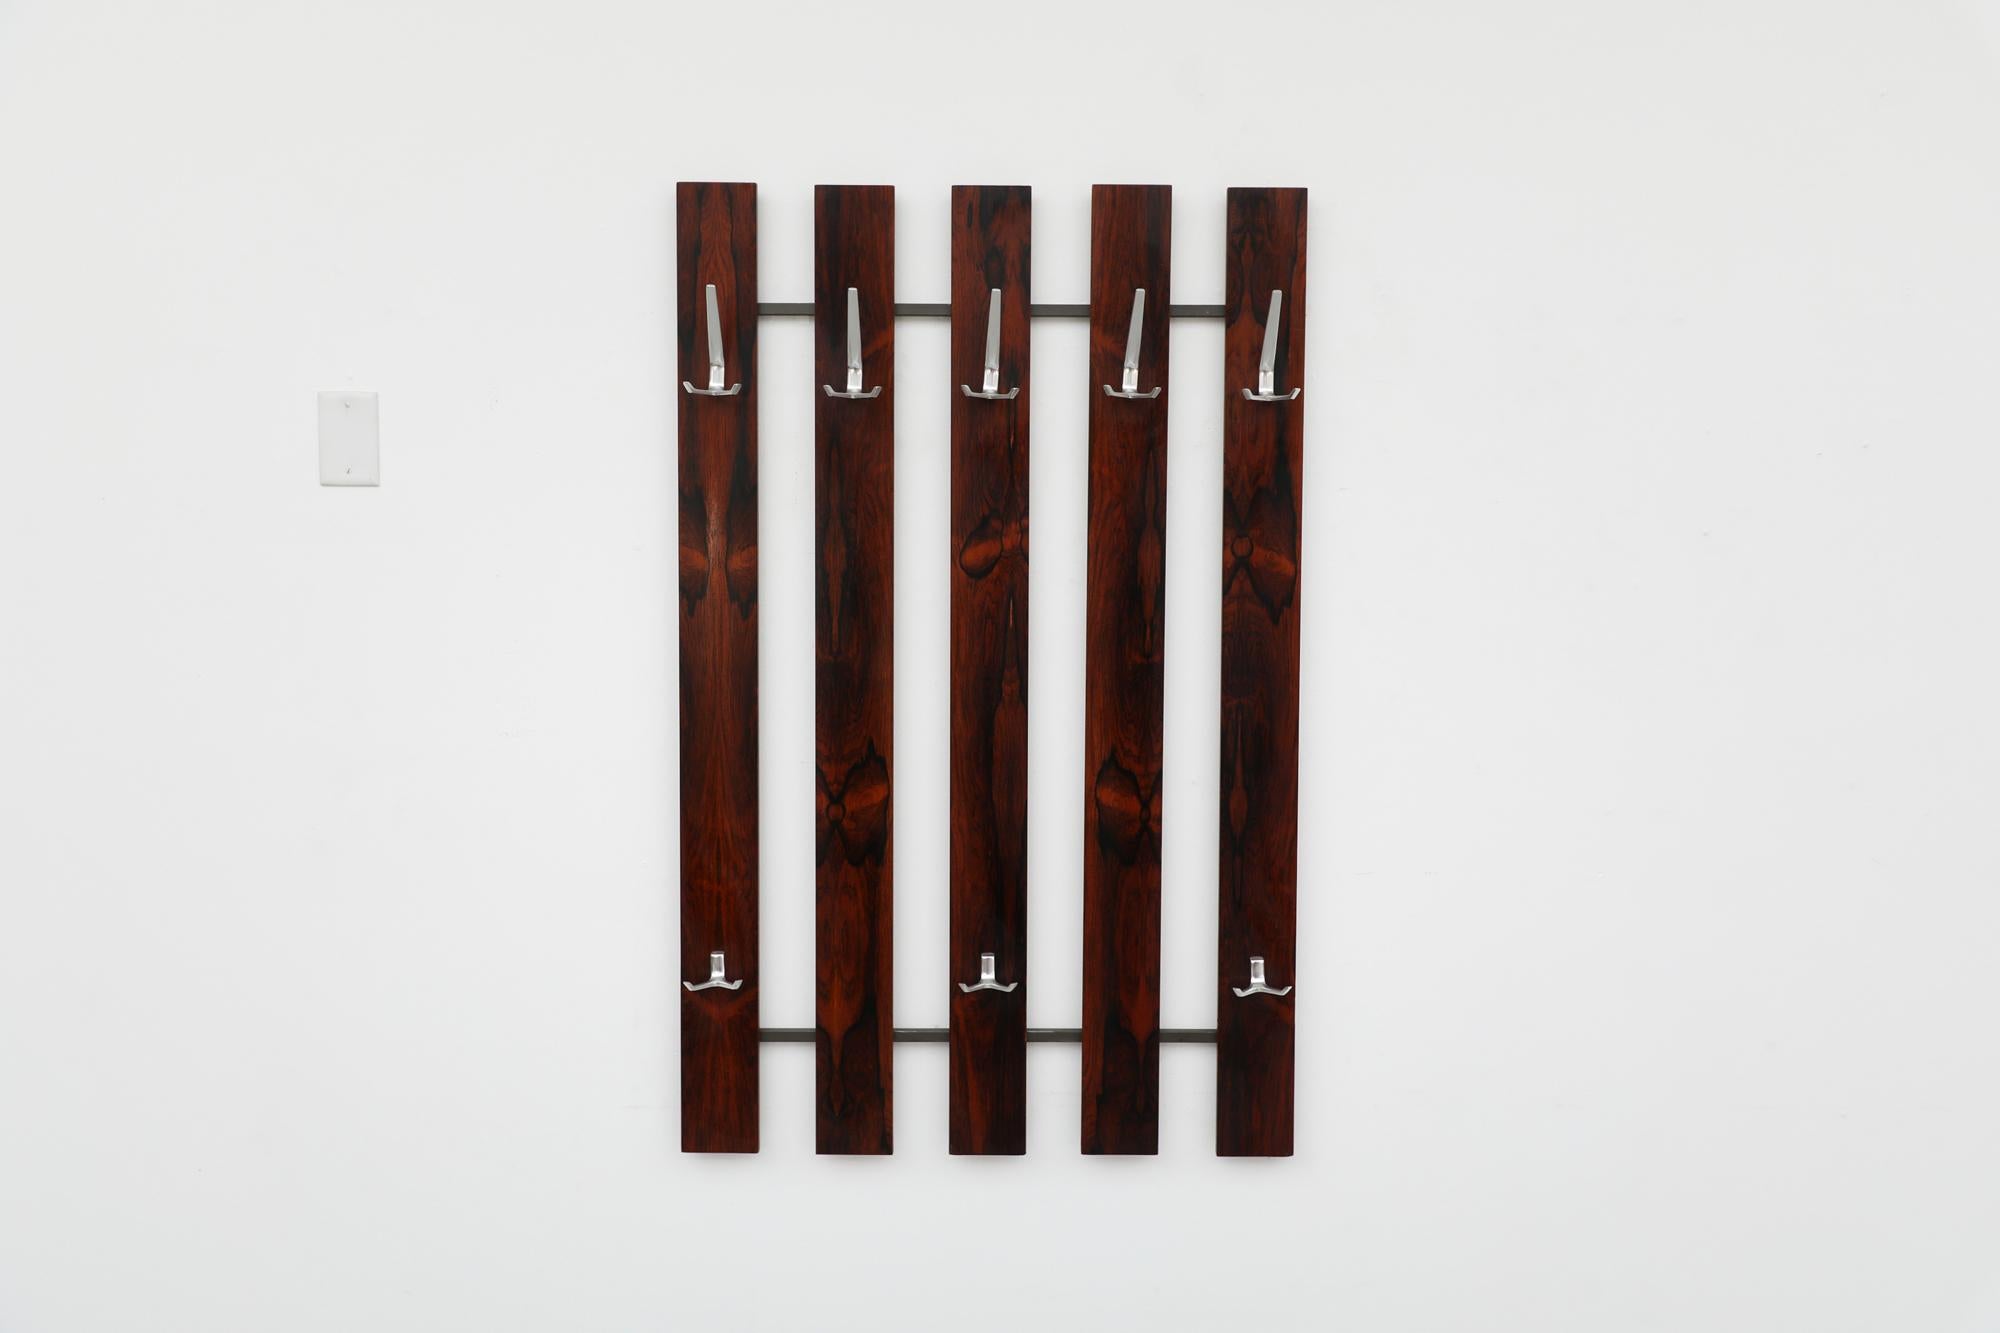 Beautiful mid-century Rosewood wall mounted coat rack with 8 cast aluminum hooks. In original condition with minimal wear and scratching. Similar coat racks also available and listed separately in various tones, also available in Wenge. Please